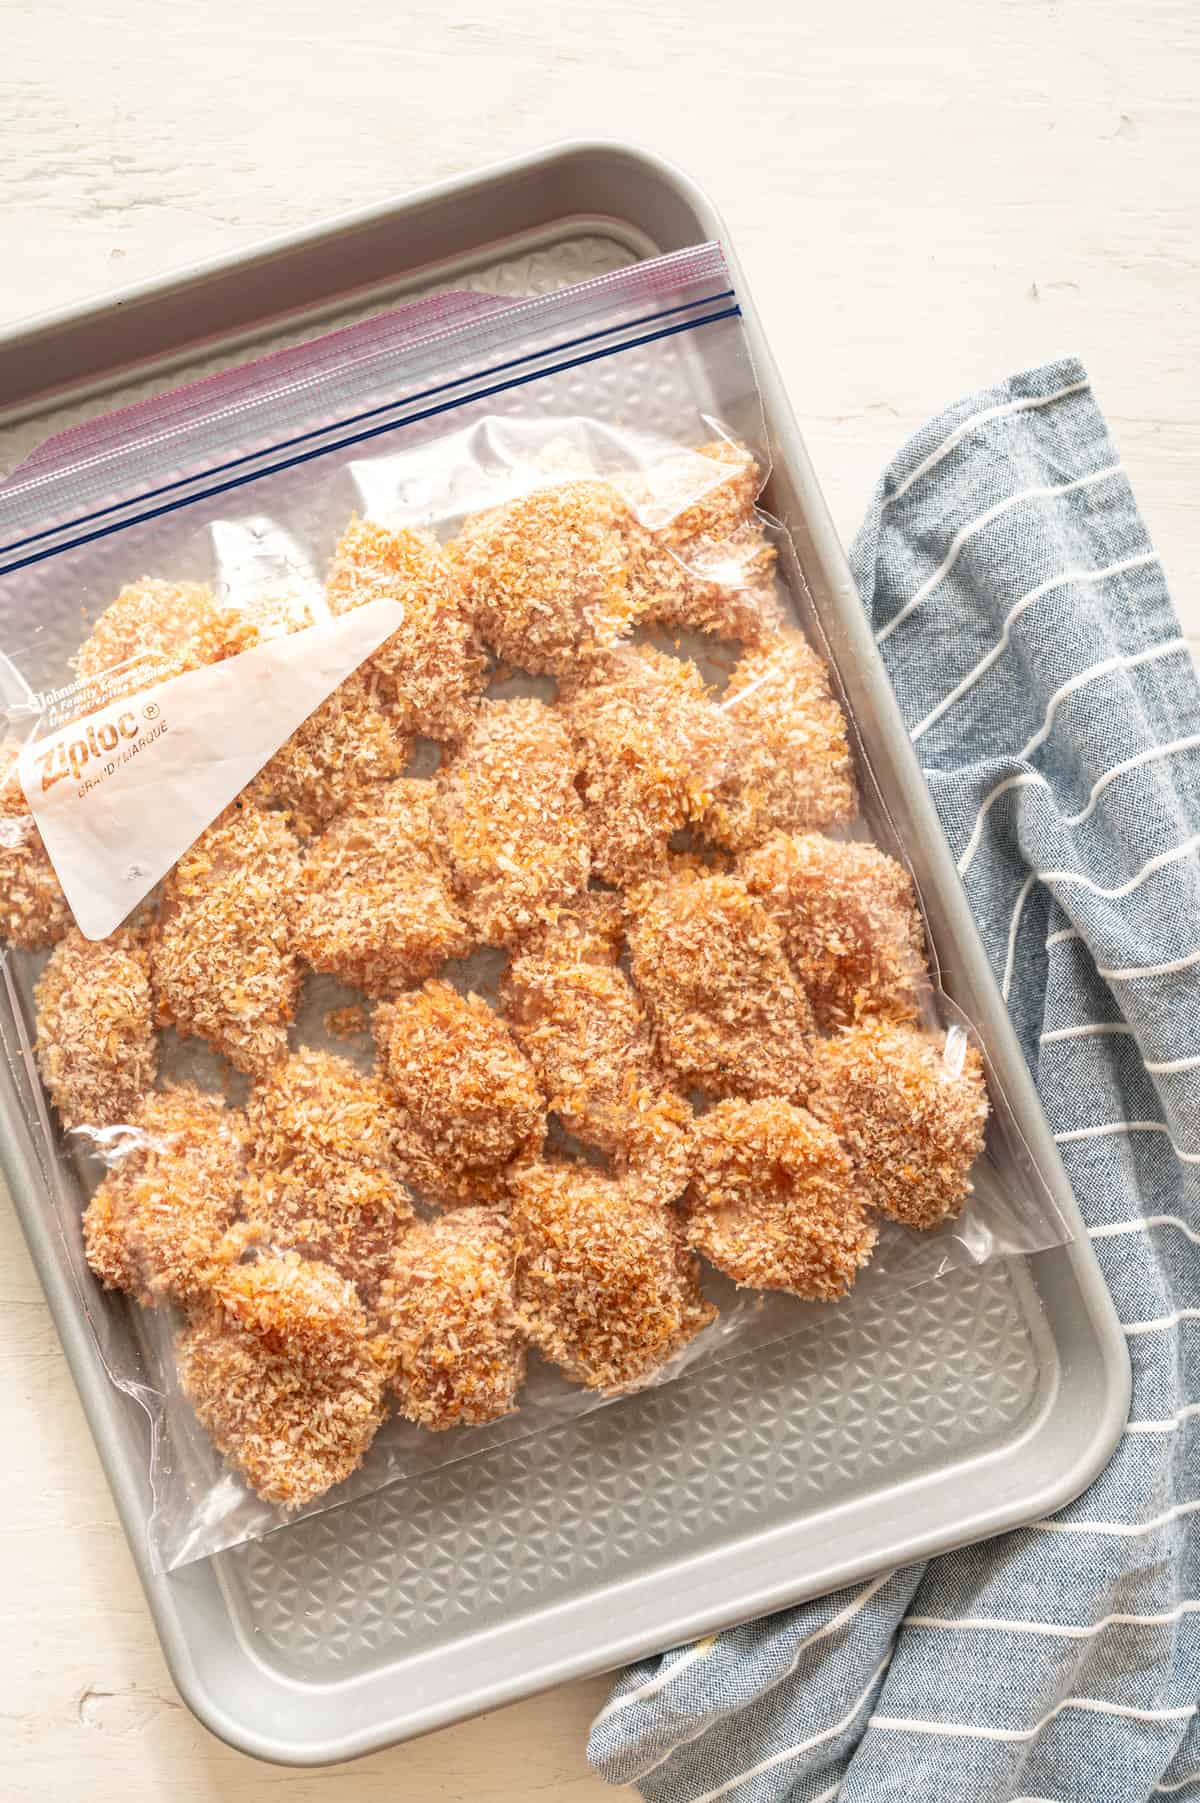 Uncooked homemade chicken nuggets in a freezer bag on a baking sheet.